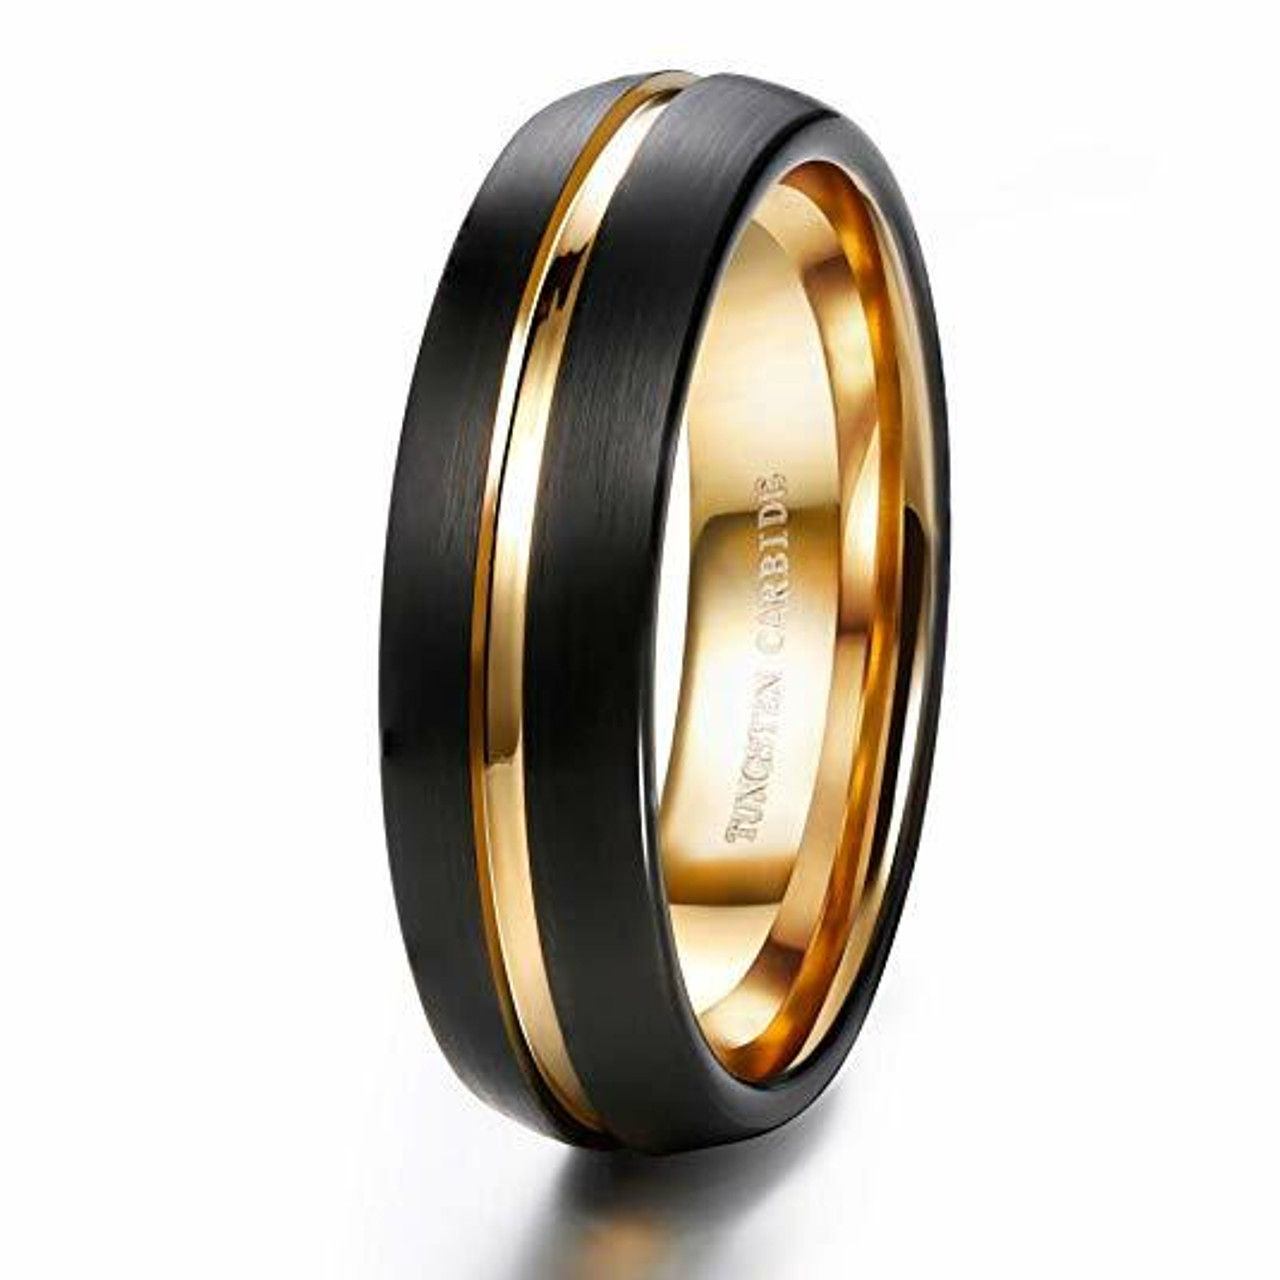 Unisex or Women's Tungsten Wedding Band (6mm). Black and 14K Yellow Gold Grooved Top and Inside. Matte Finish Tungsten Carbide Ring with Beveled Edges.